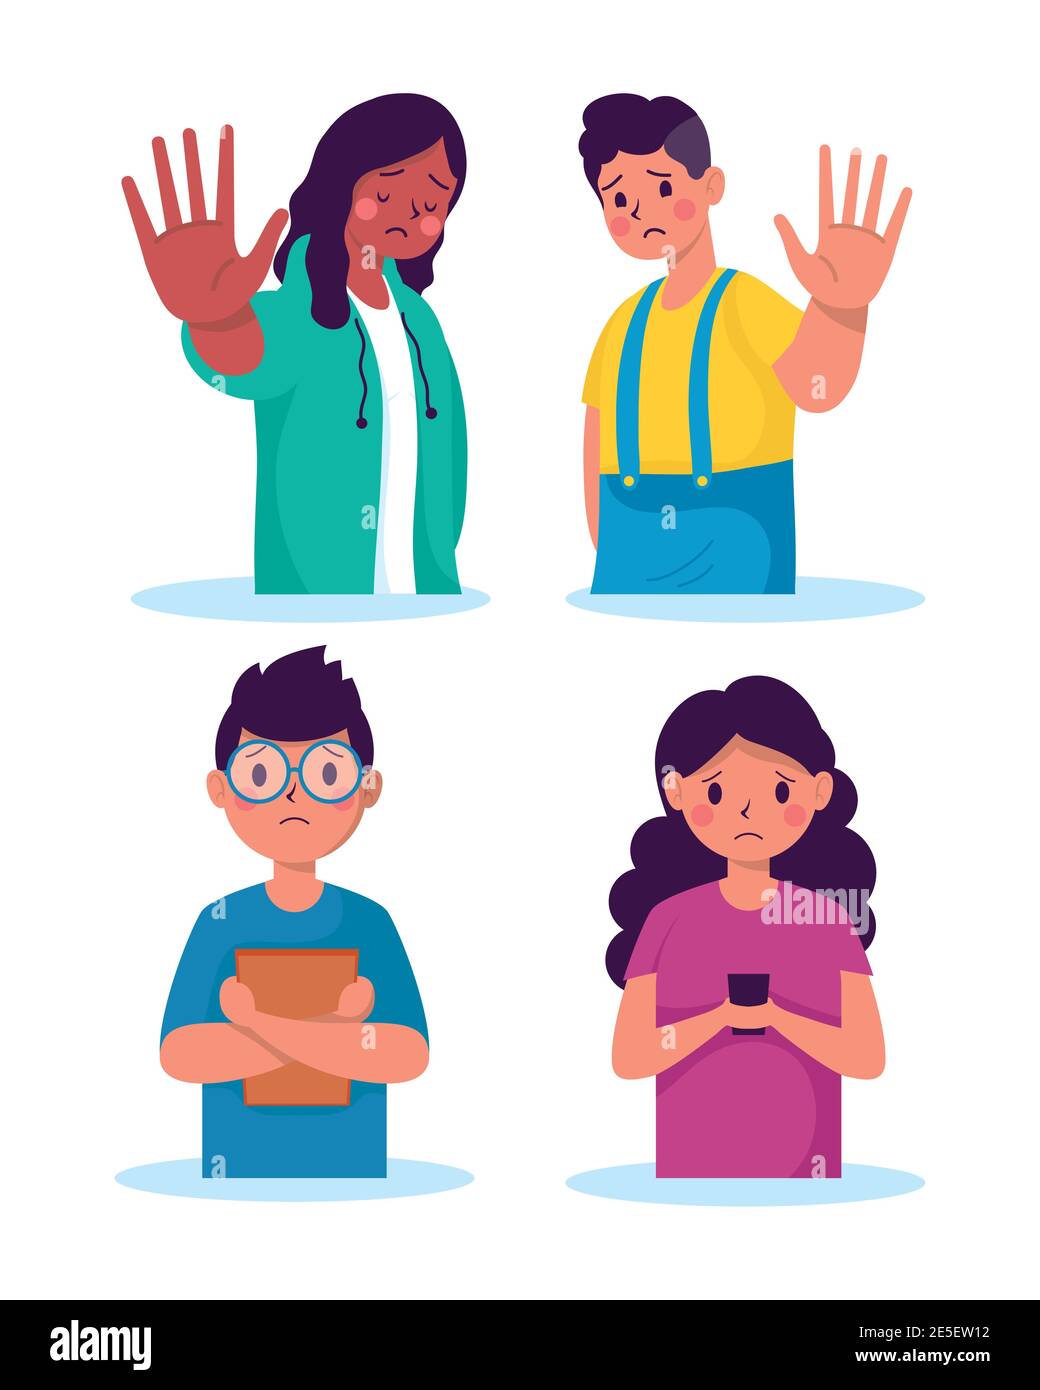 young people victims of bullying characters vector illustration design Stock Vector